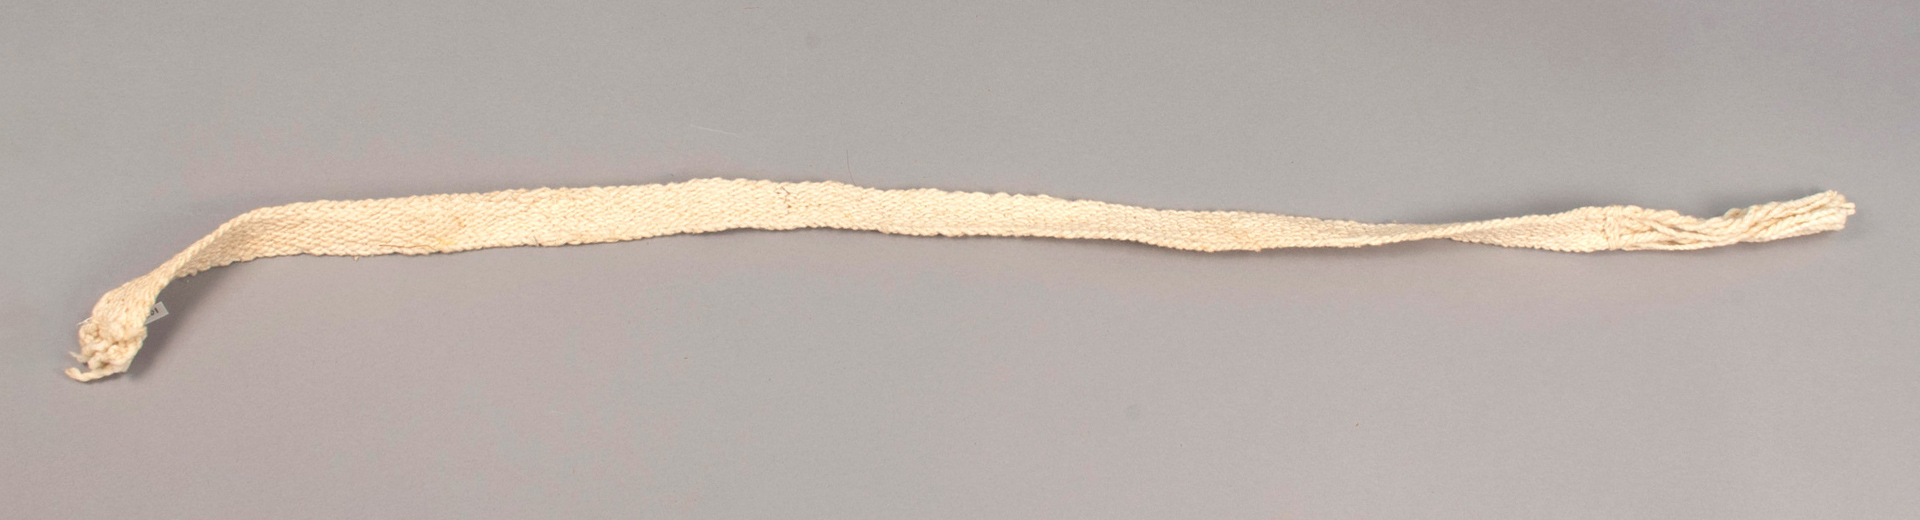 long woven strip of white yarn with frayed edges